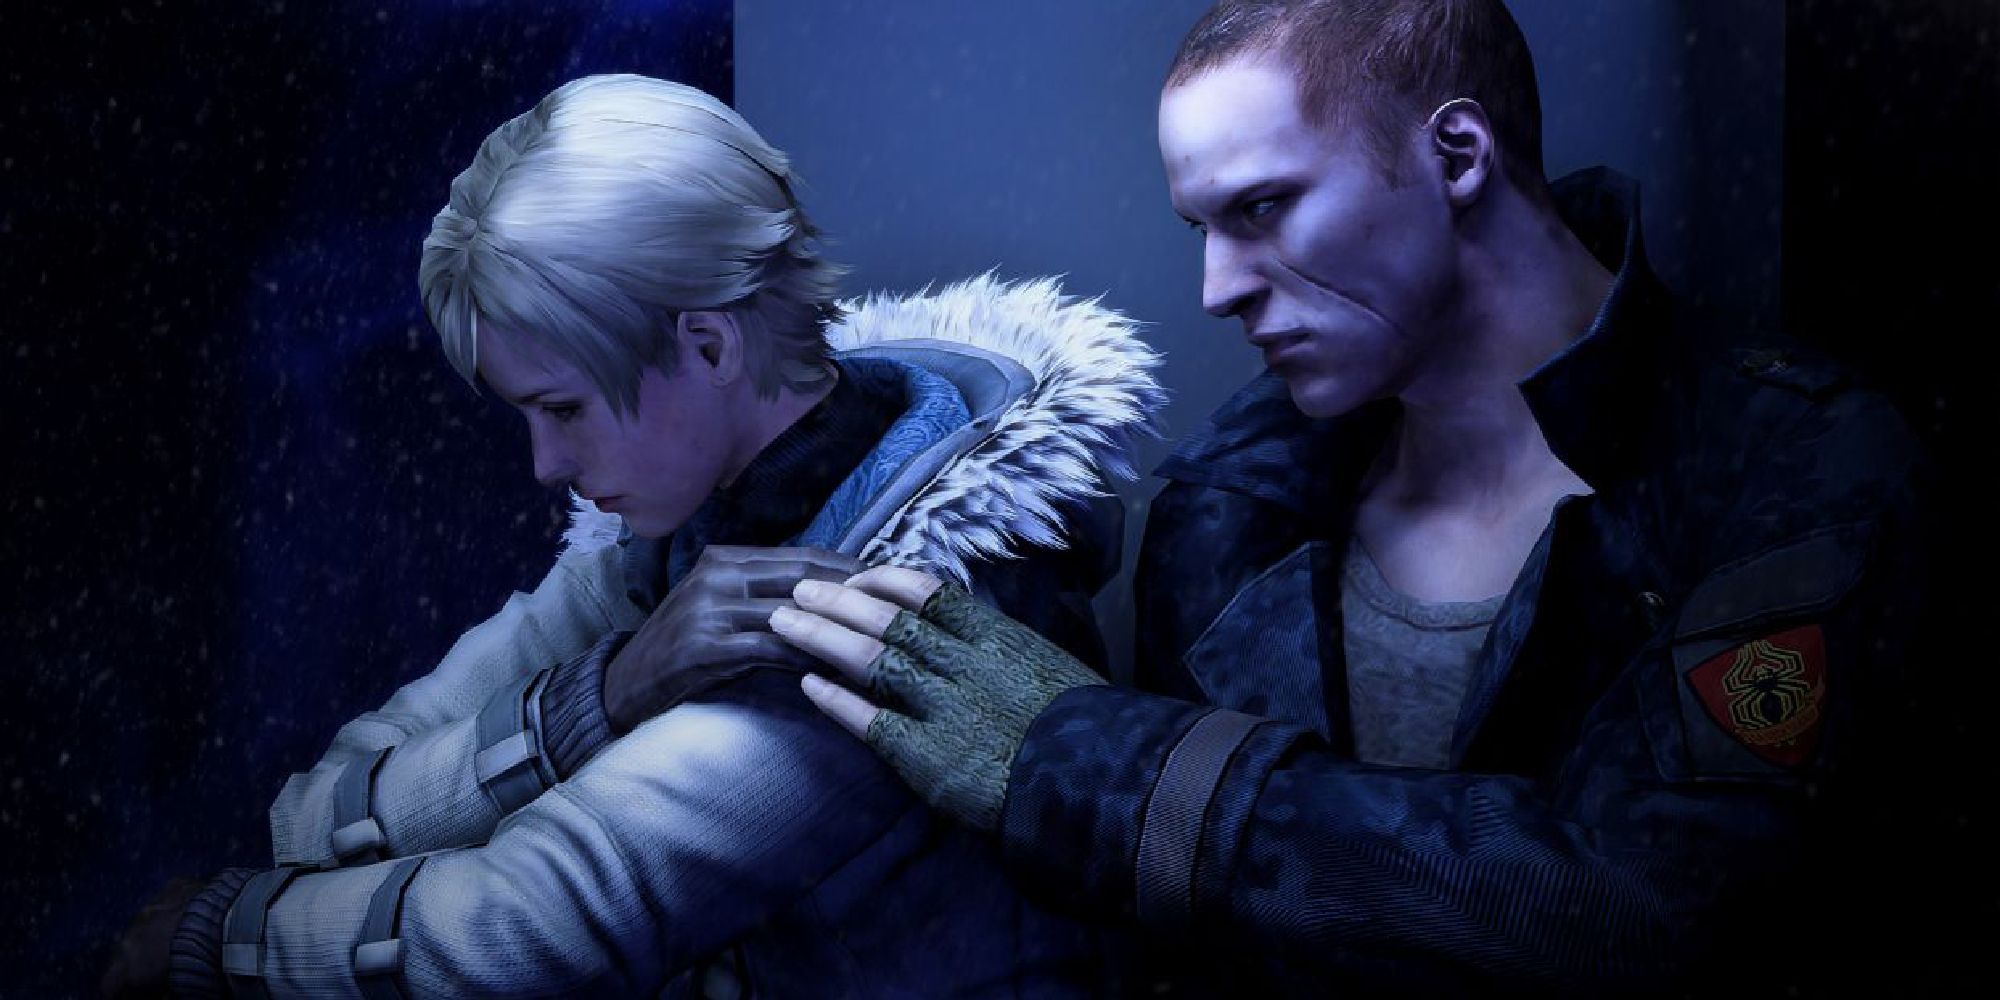 Sherry and Jake sharing a quiet moment in Resident Evil 6.